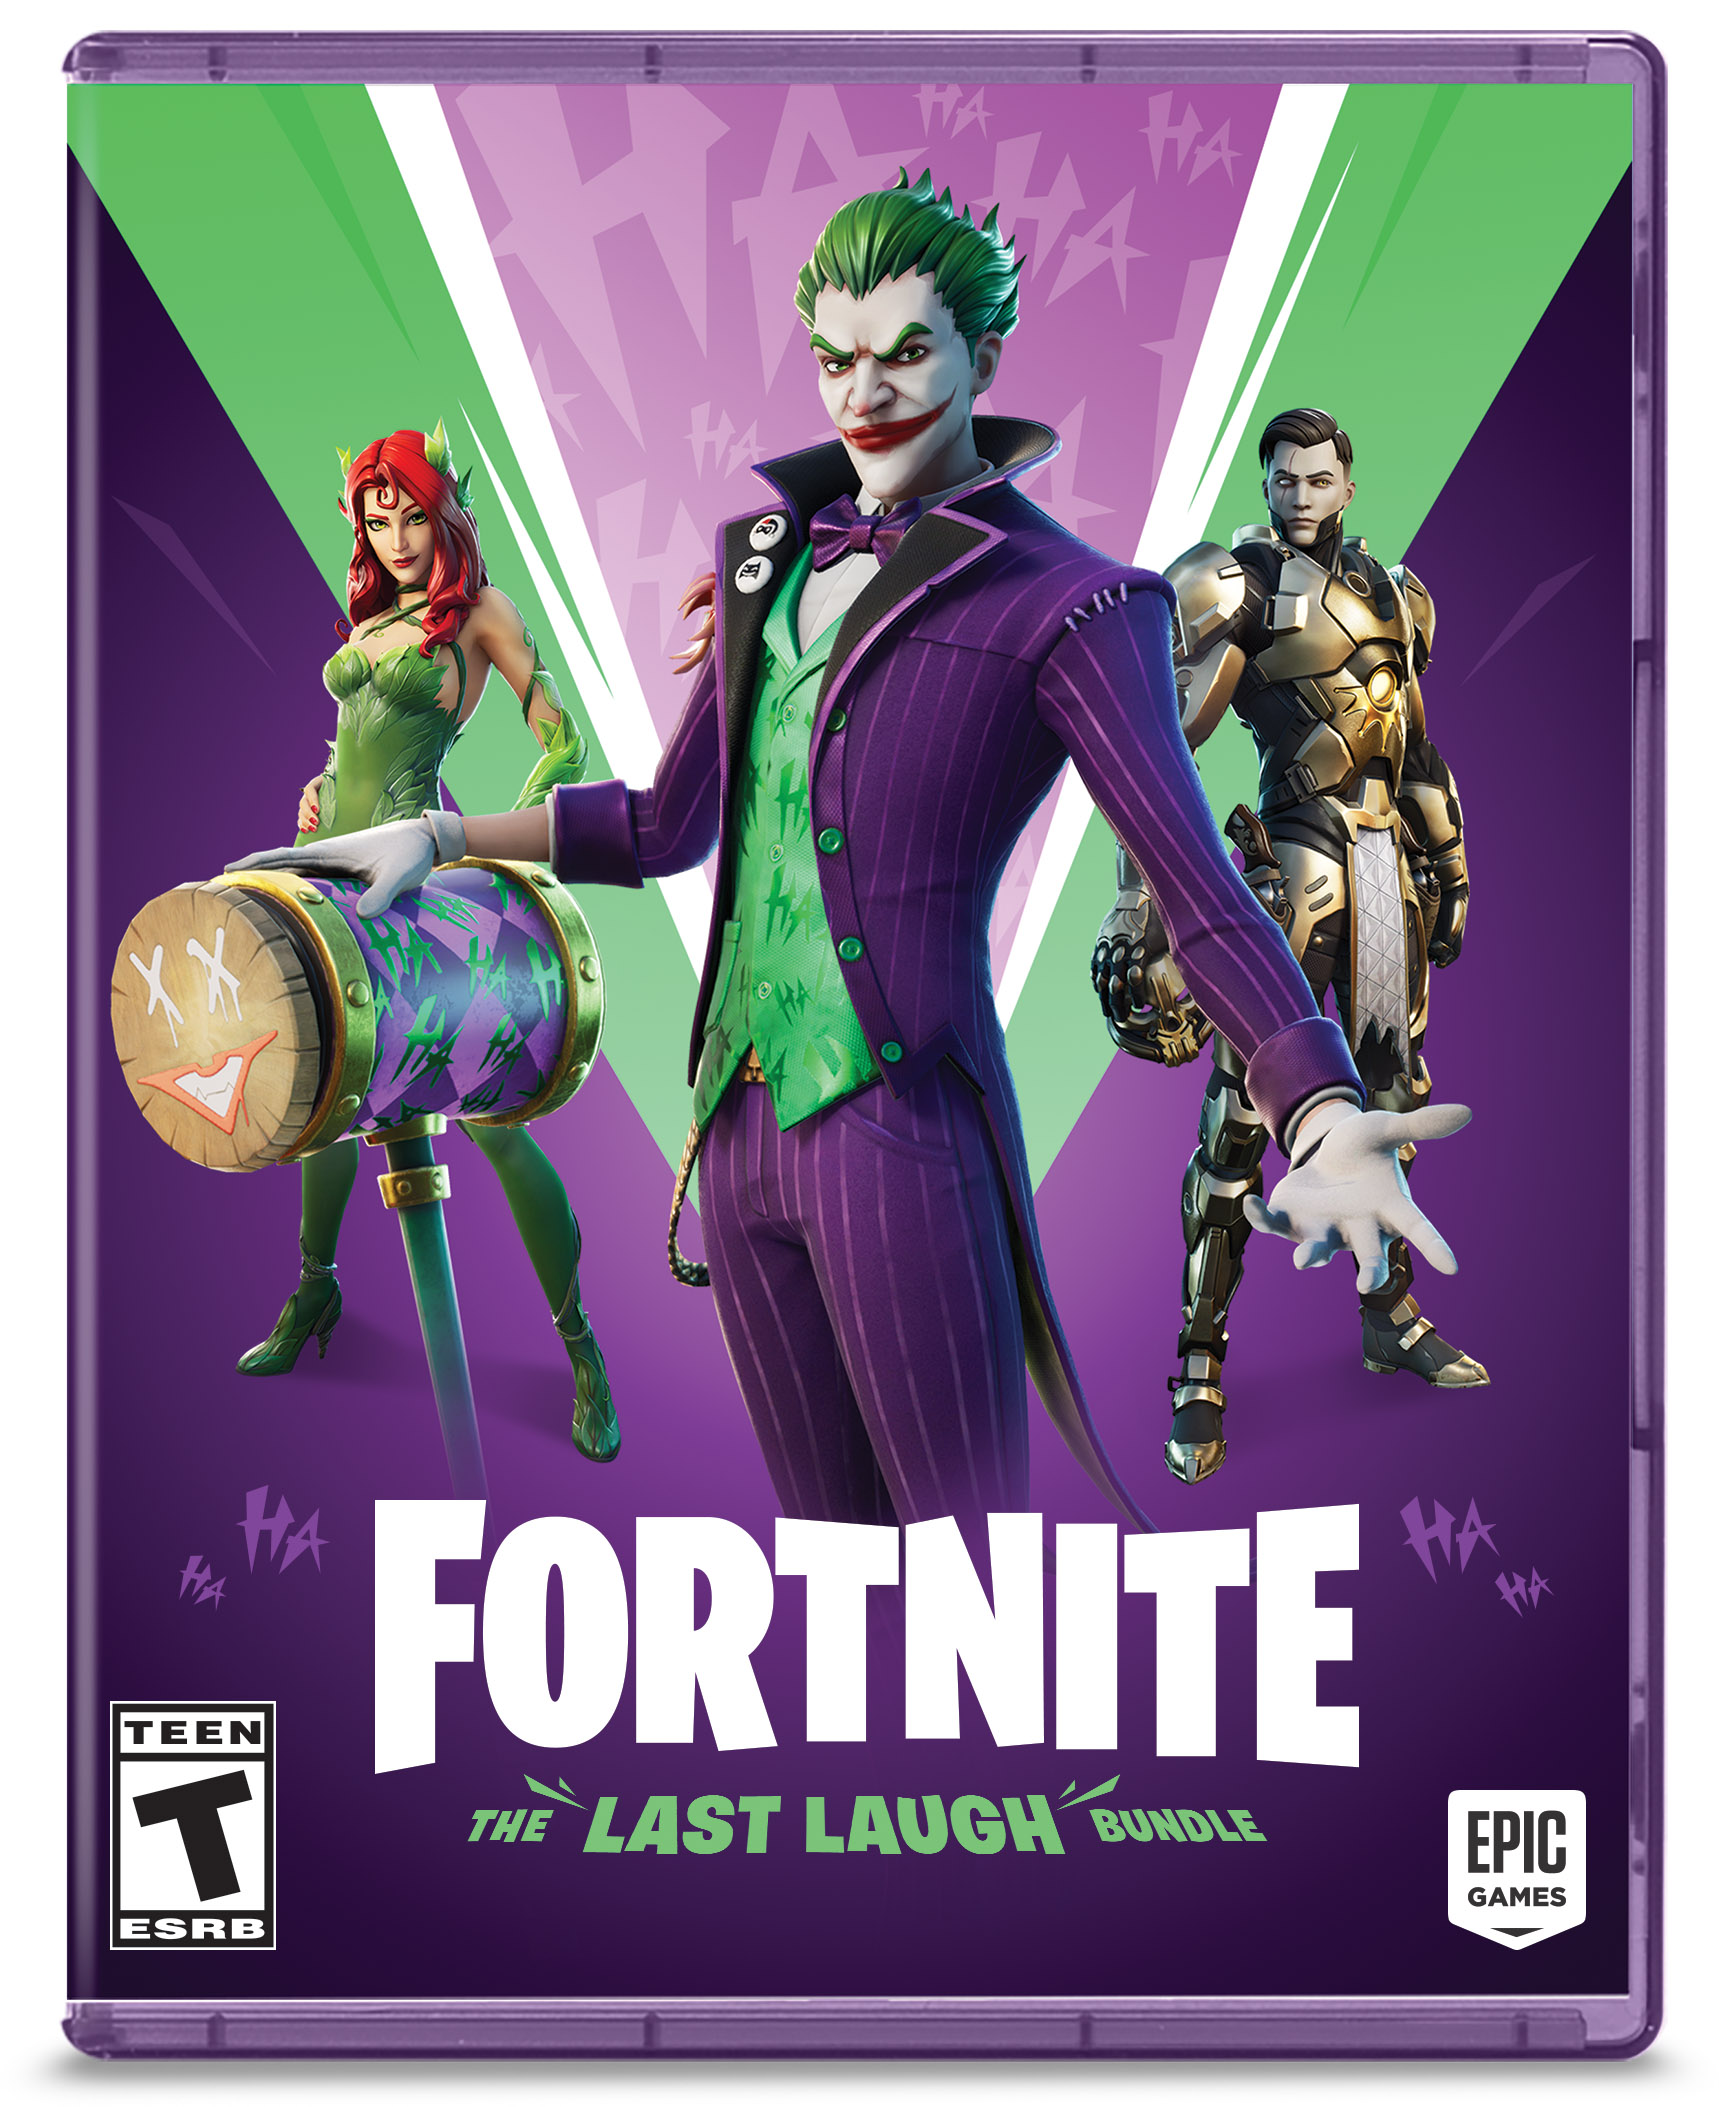 Xbox announces Fortnite console bundle with exclusive outfit and